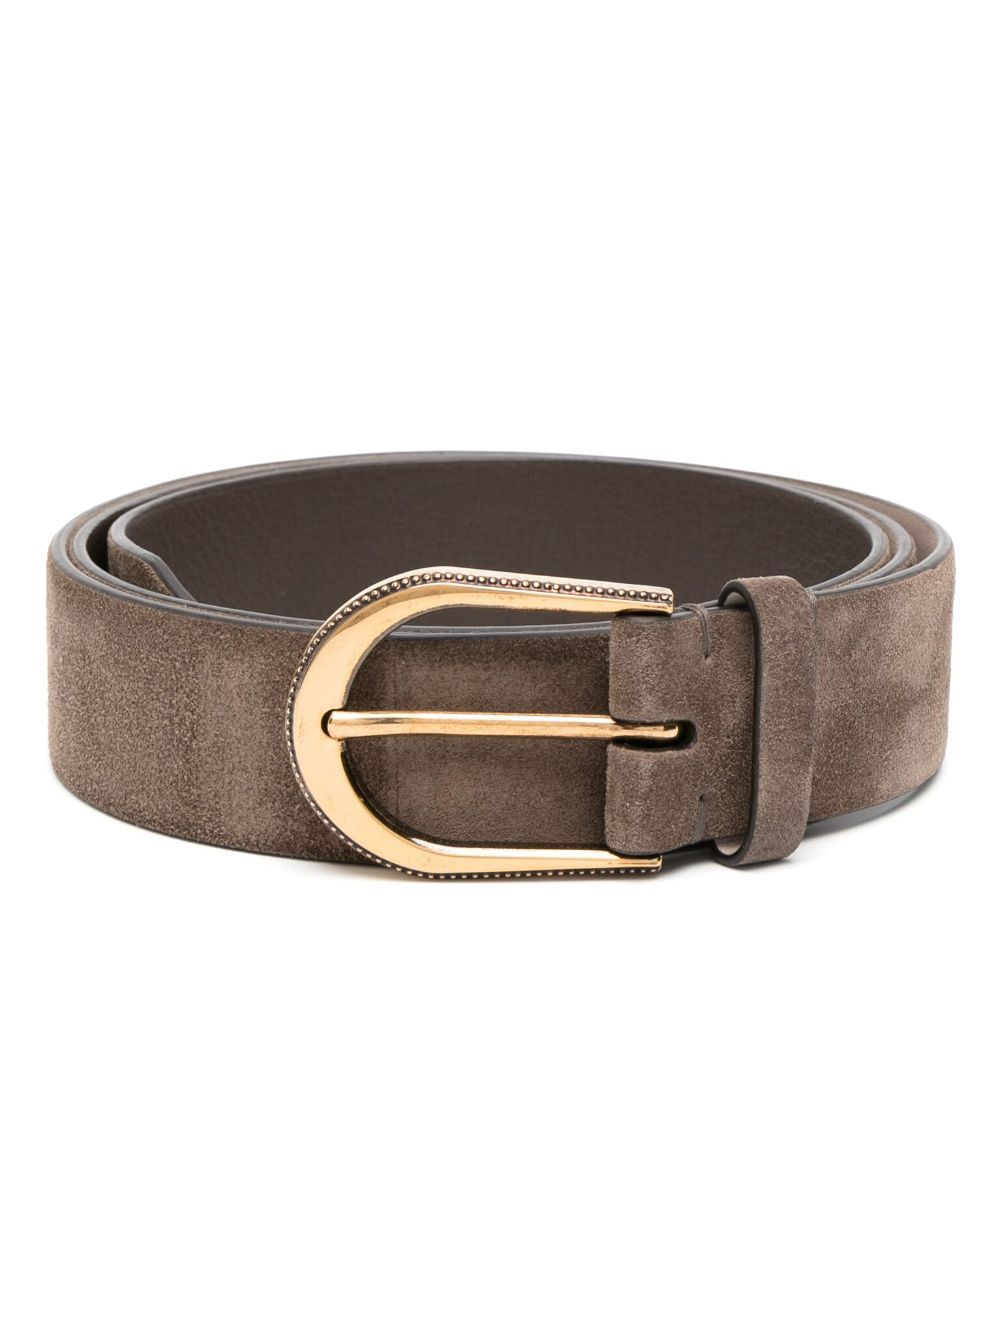 Brown Suede Leather Belt With Silver Metal Buckle for Men By Brune & B